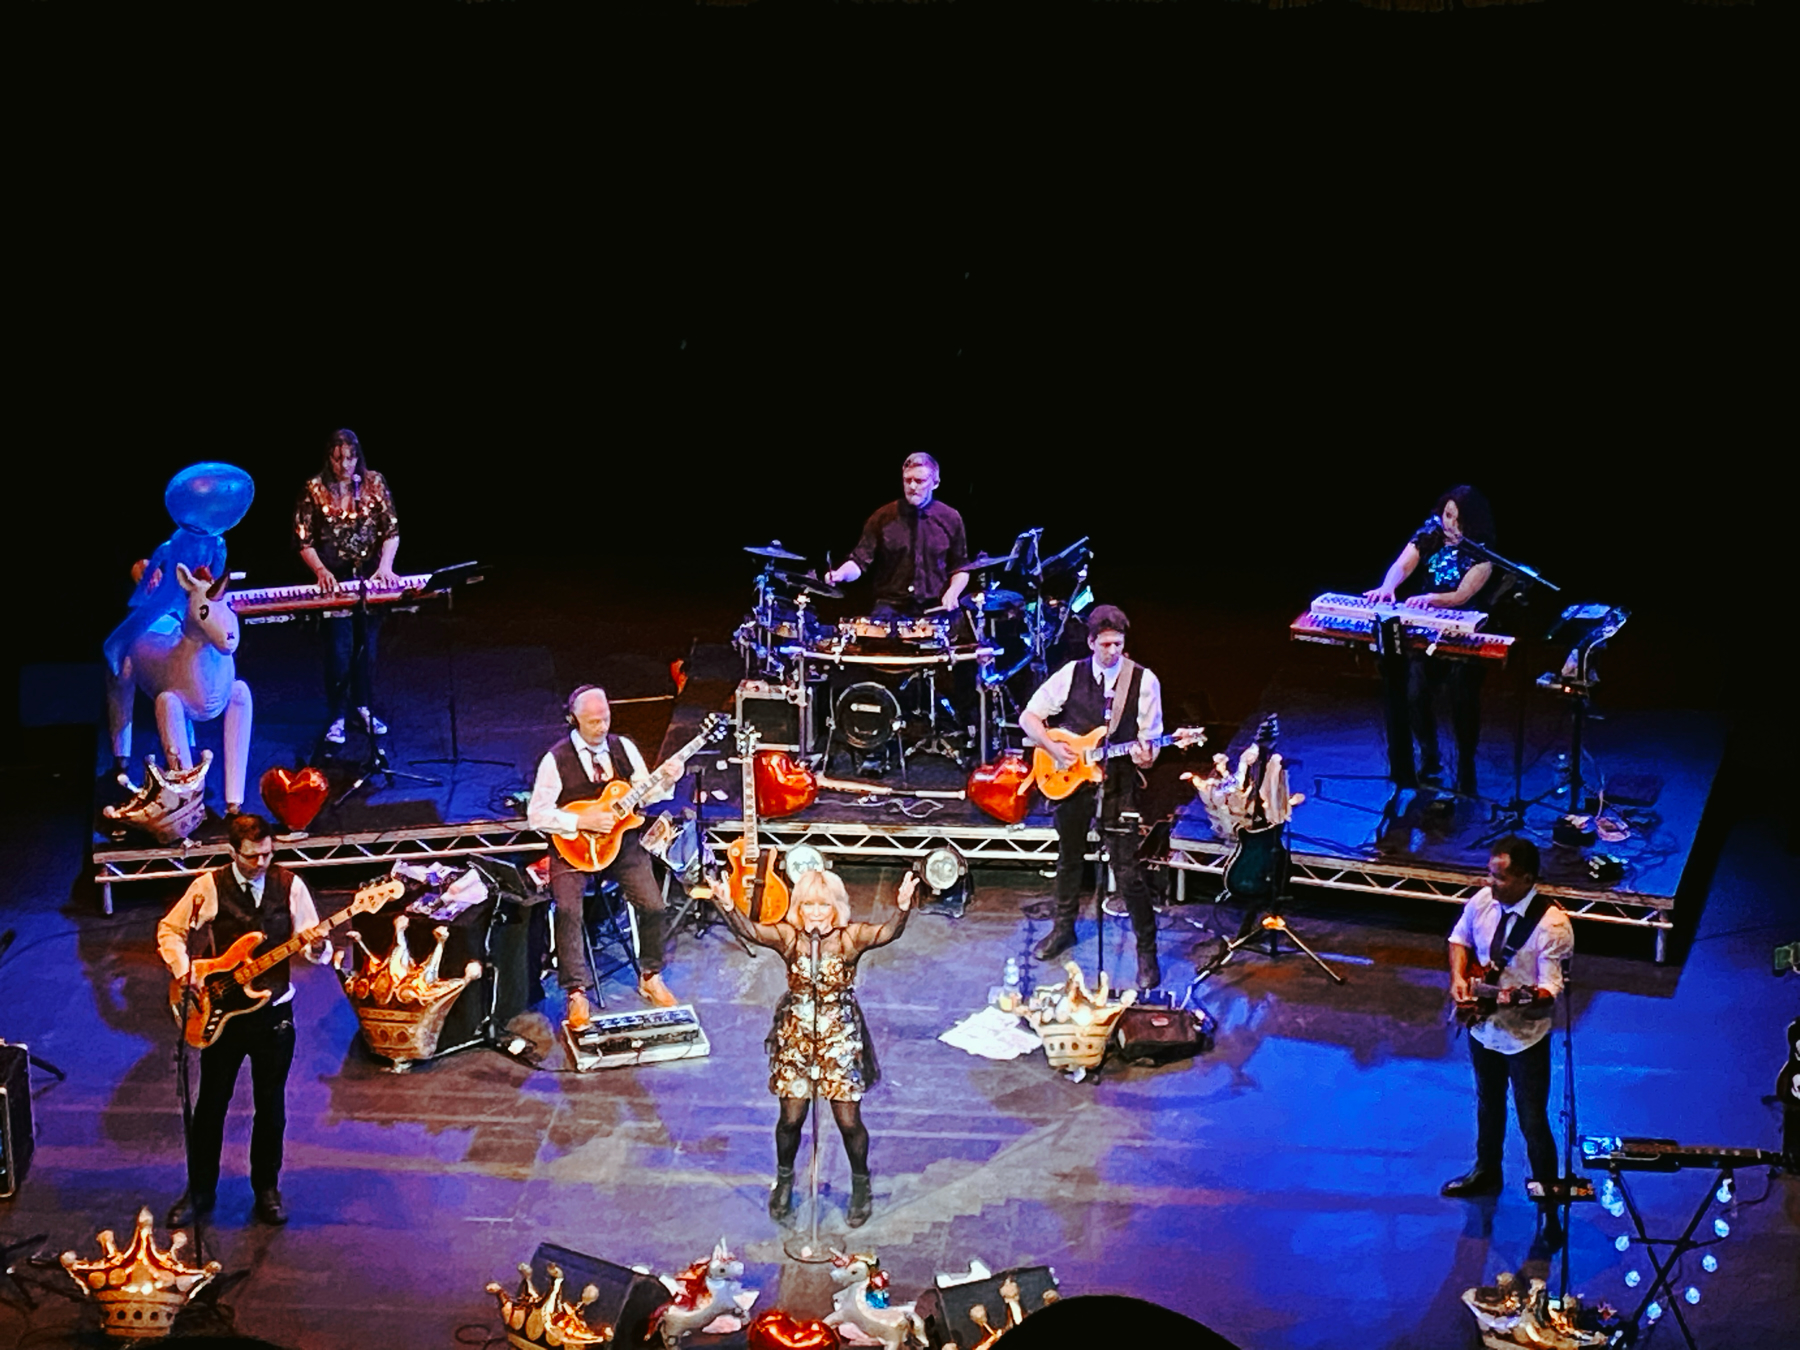 Theatre stage with band of 8 musicians - woman singing in sparkling dress, 4 guitarists, 2 keyboard players and drummer